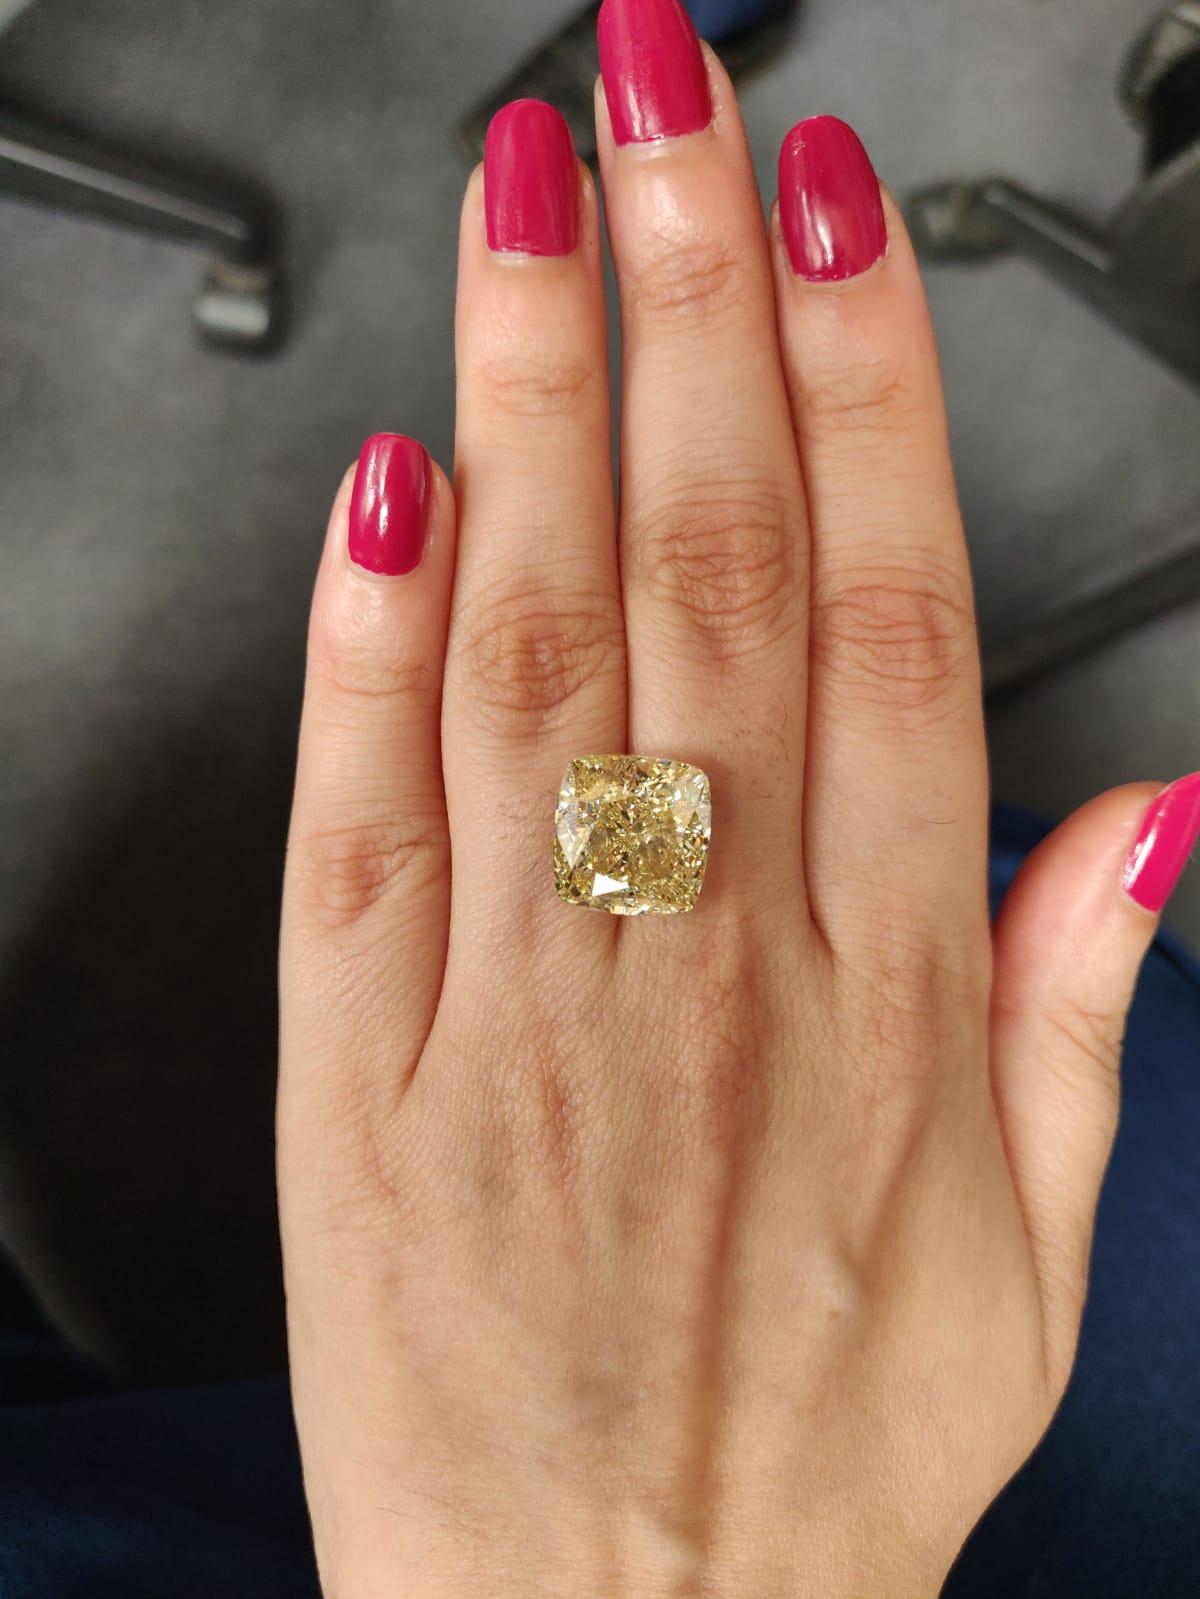 GIA Certified 14 Carat Yellow Cushion Cut Diamond 
Excellent Polish
Excellent Symmetry
None Fluorescence